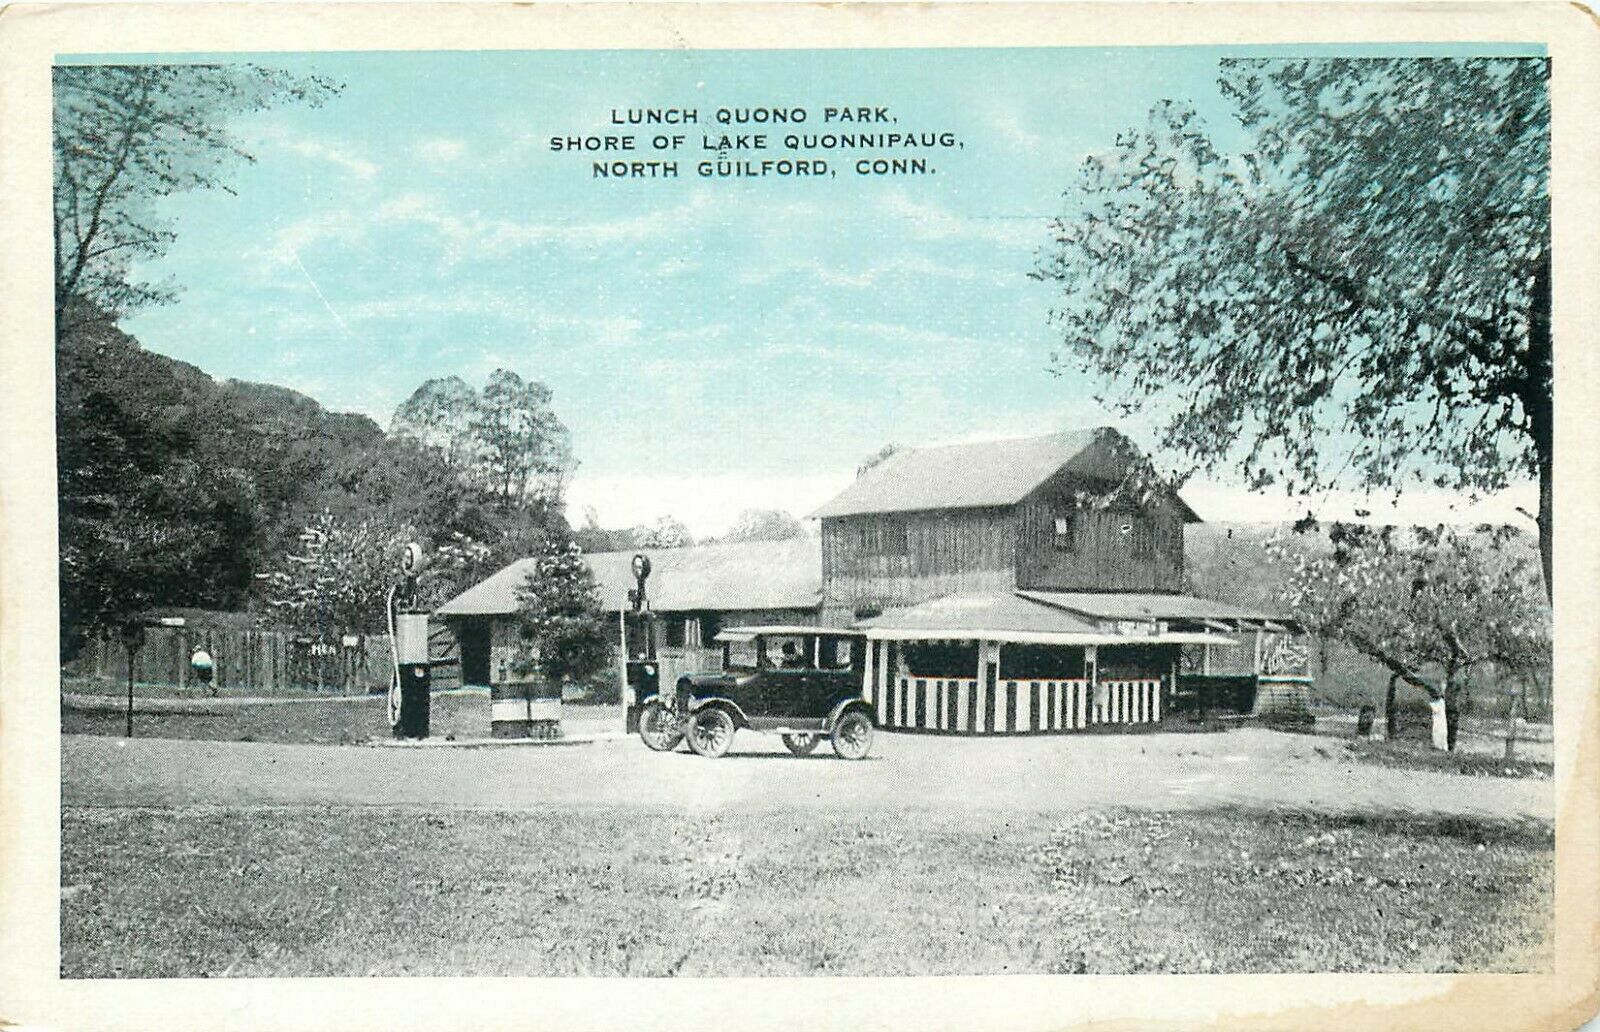 North Guilford Connecticut Lunch Quono Park Lake Quonnipaug Old Postcard View